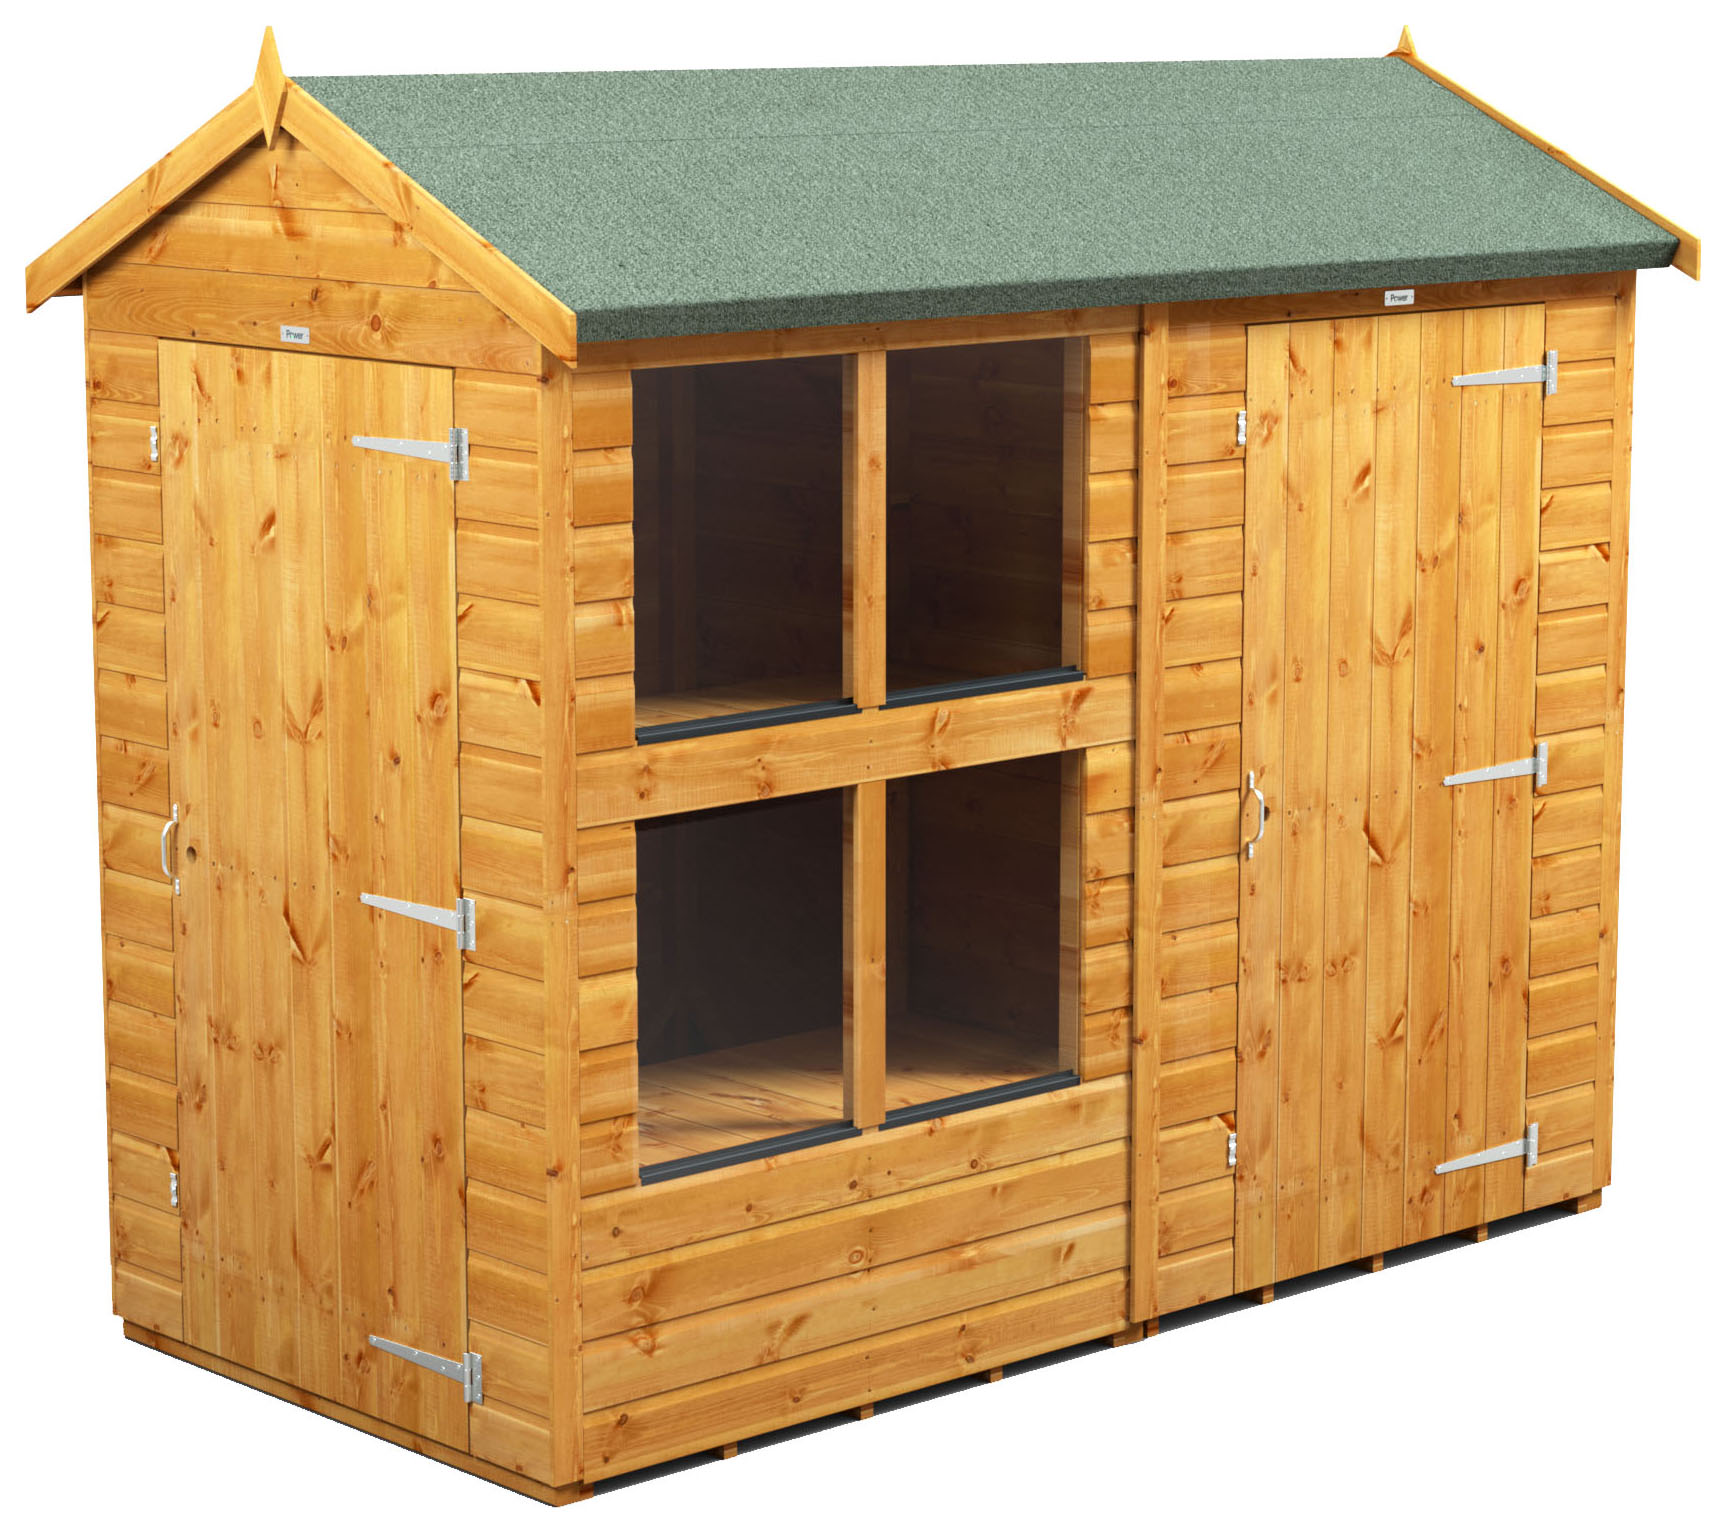 Power Sheds 8 x 4ft Apex Shiplap Dip Treated Potting Shed - Including 4ft Side Store